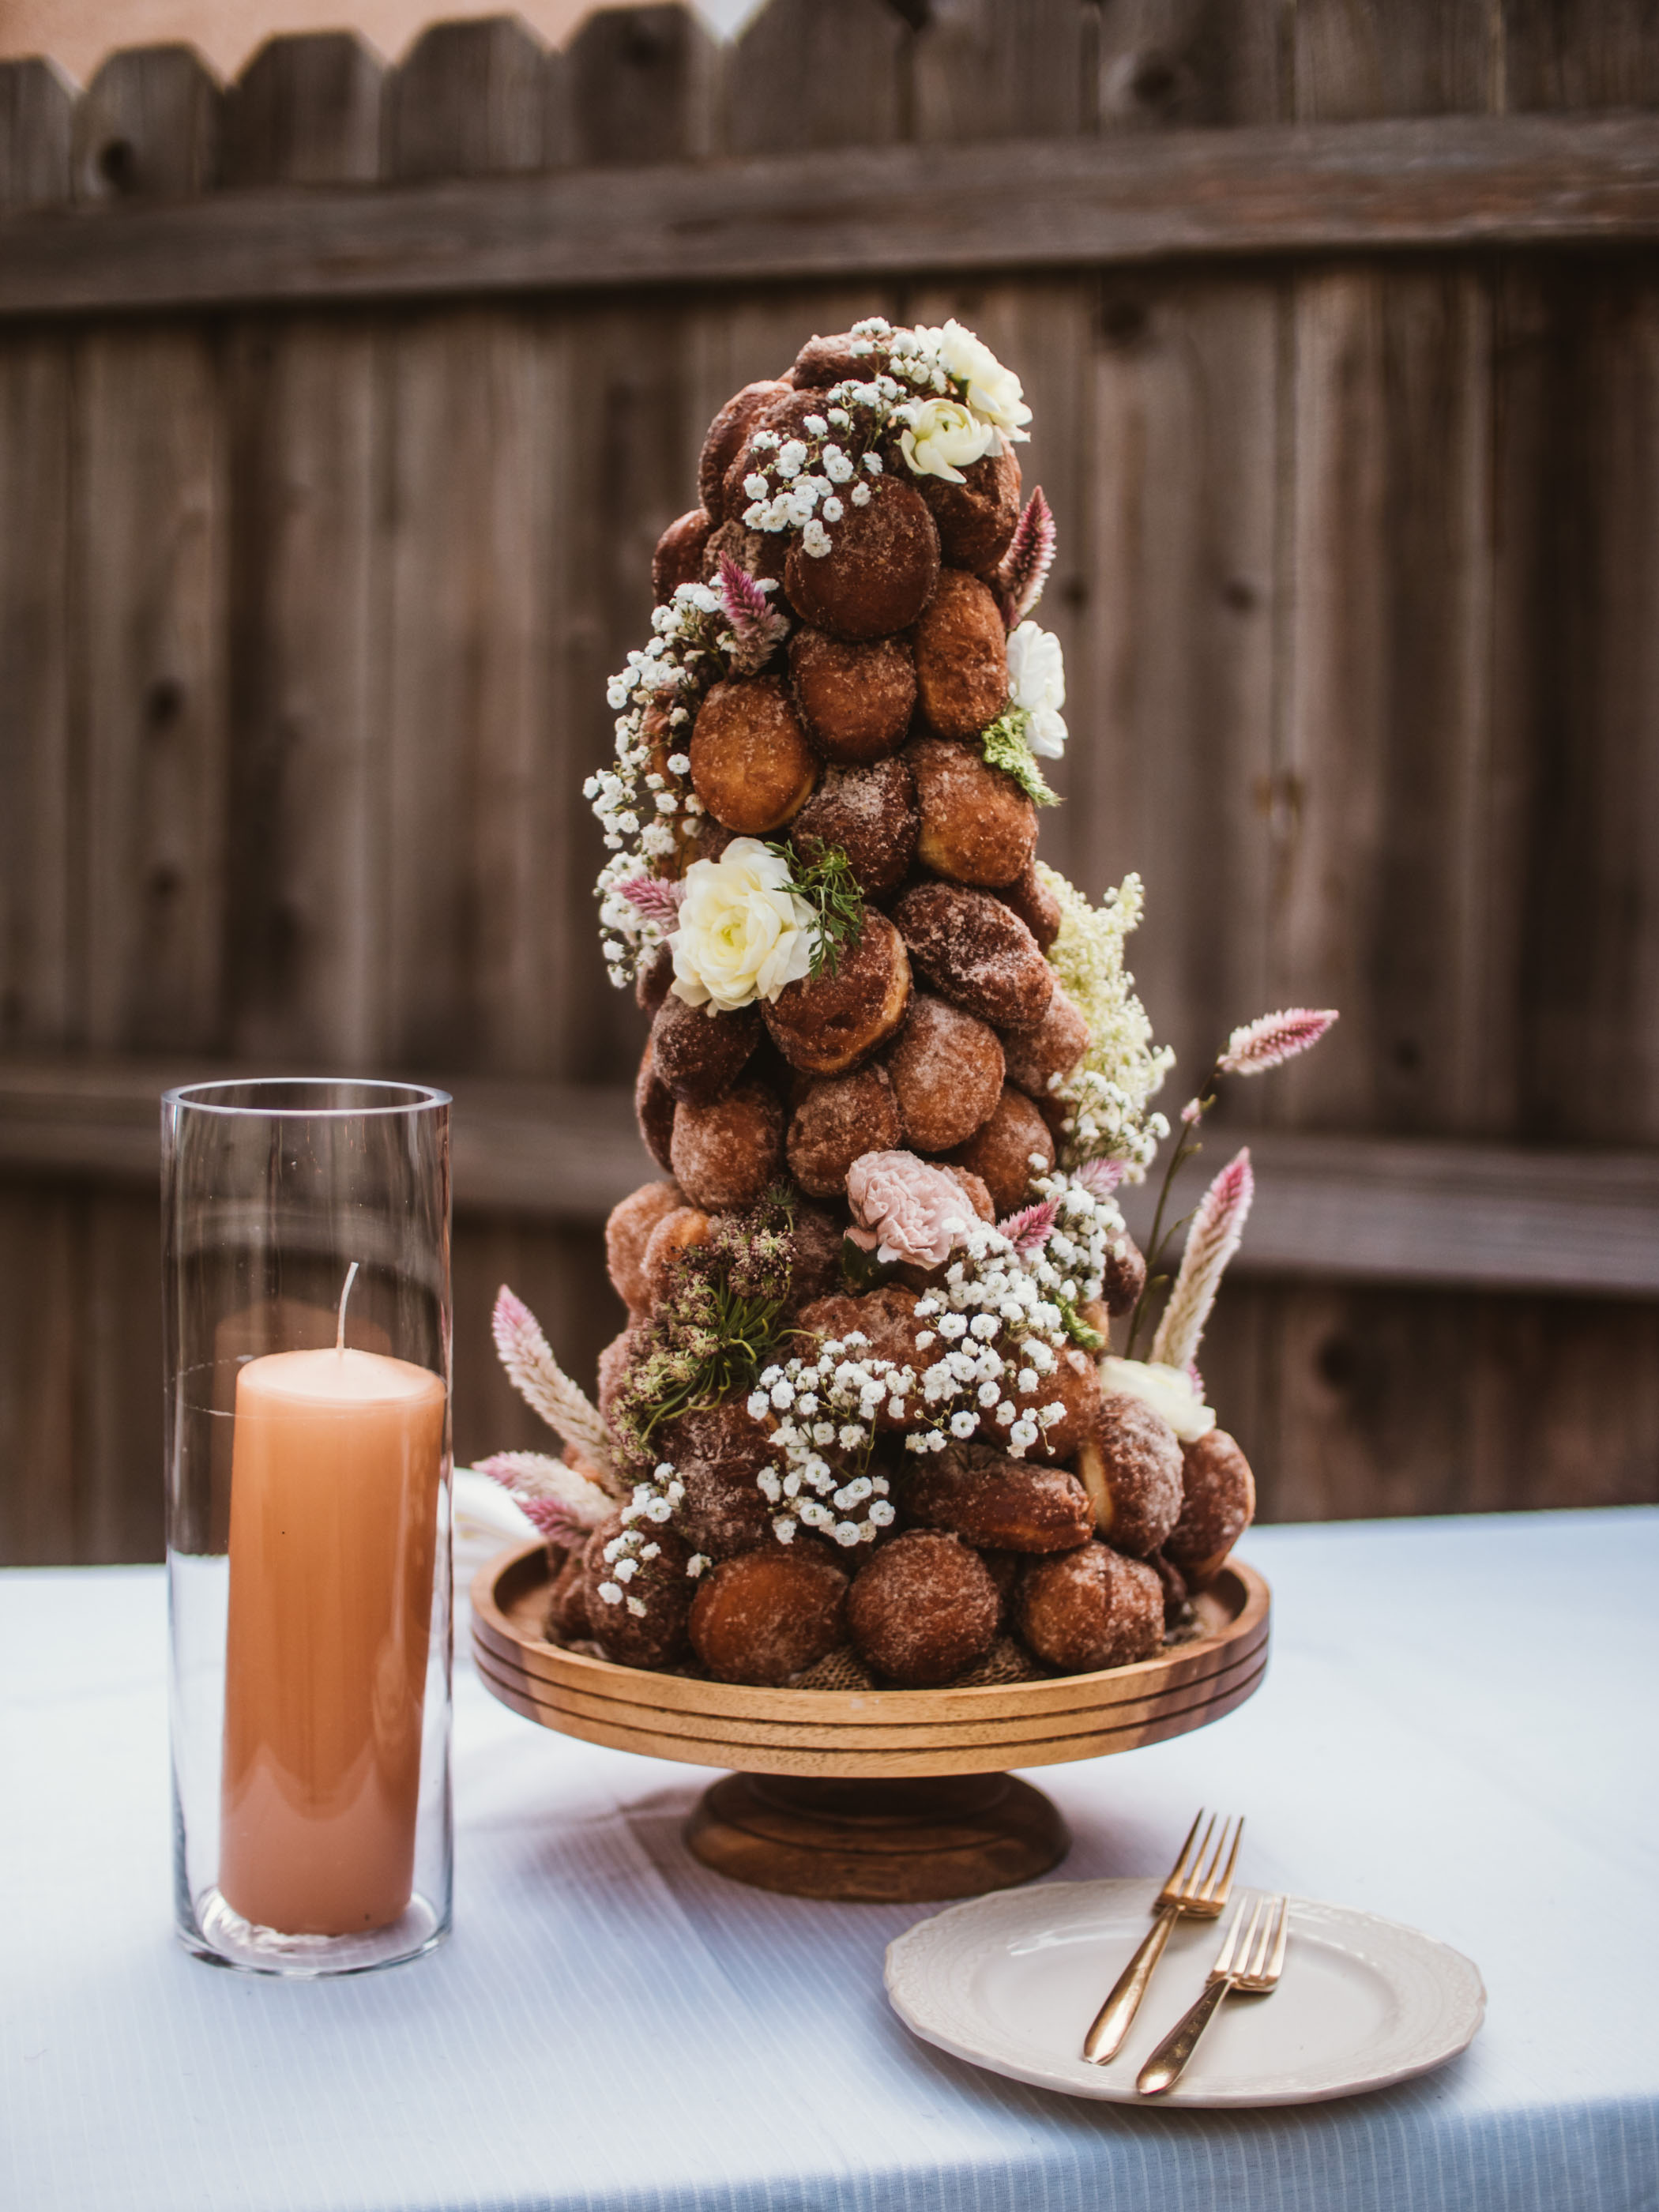 Donut hole wedding cake decorated with baby's breath